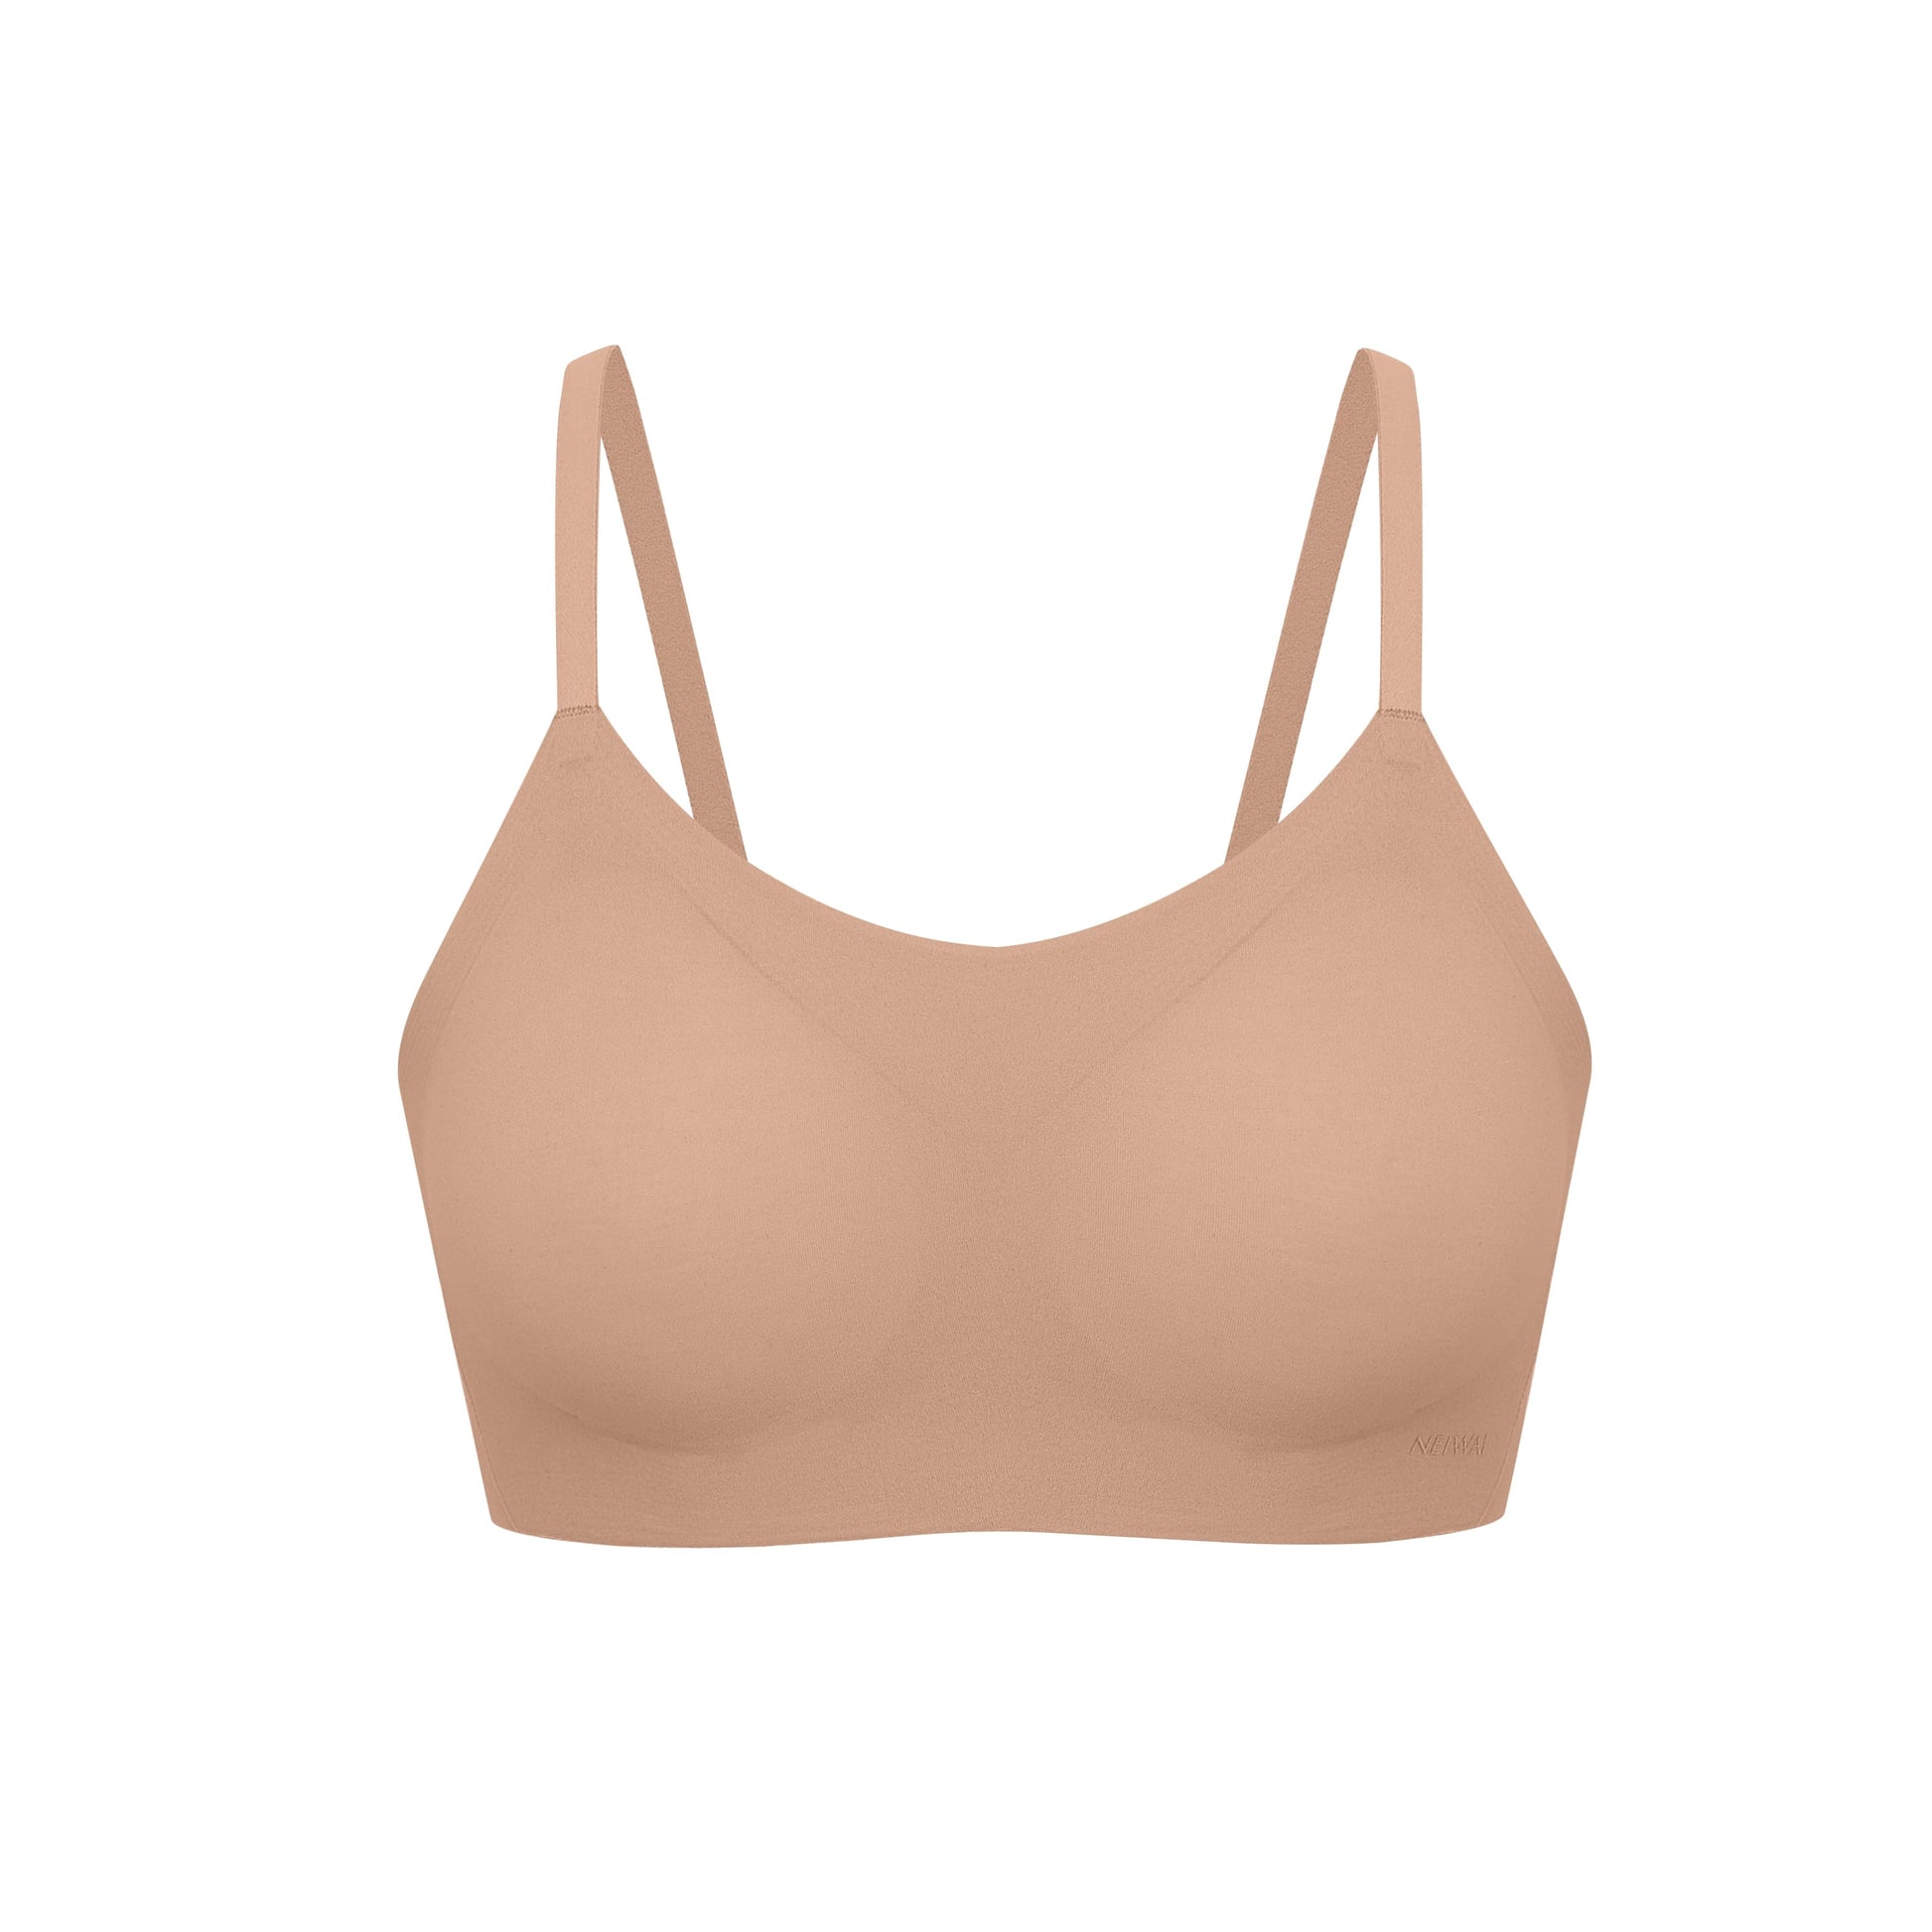 Third Love bra NWT 44D strapless with clear or beige attachable straps  included